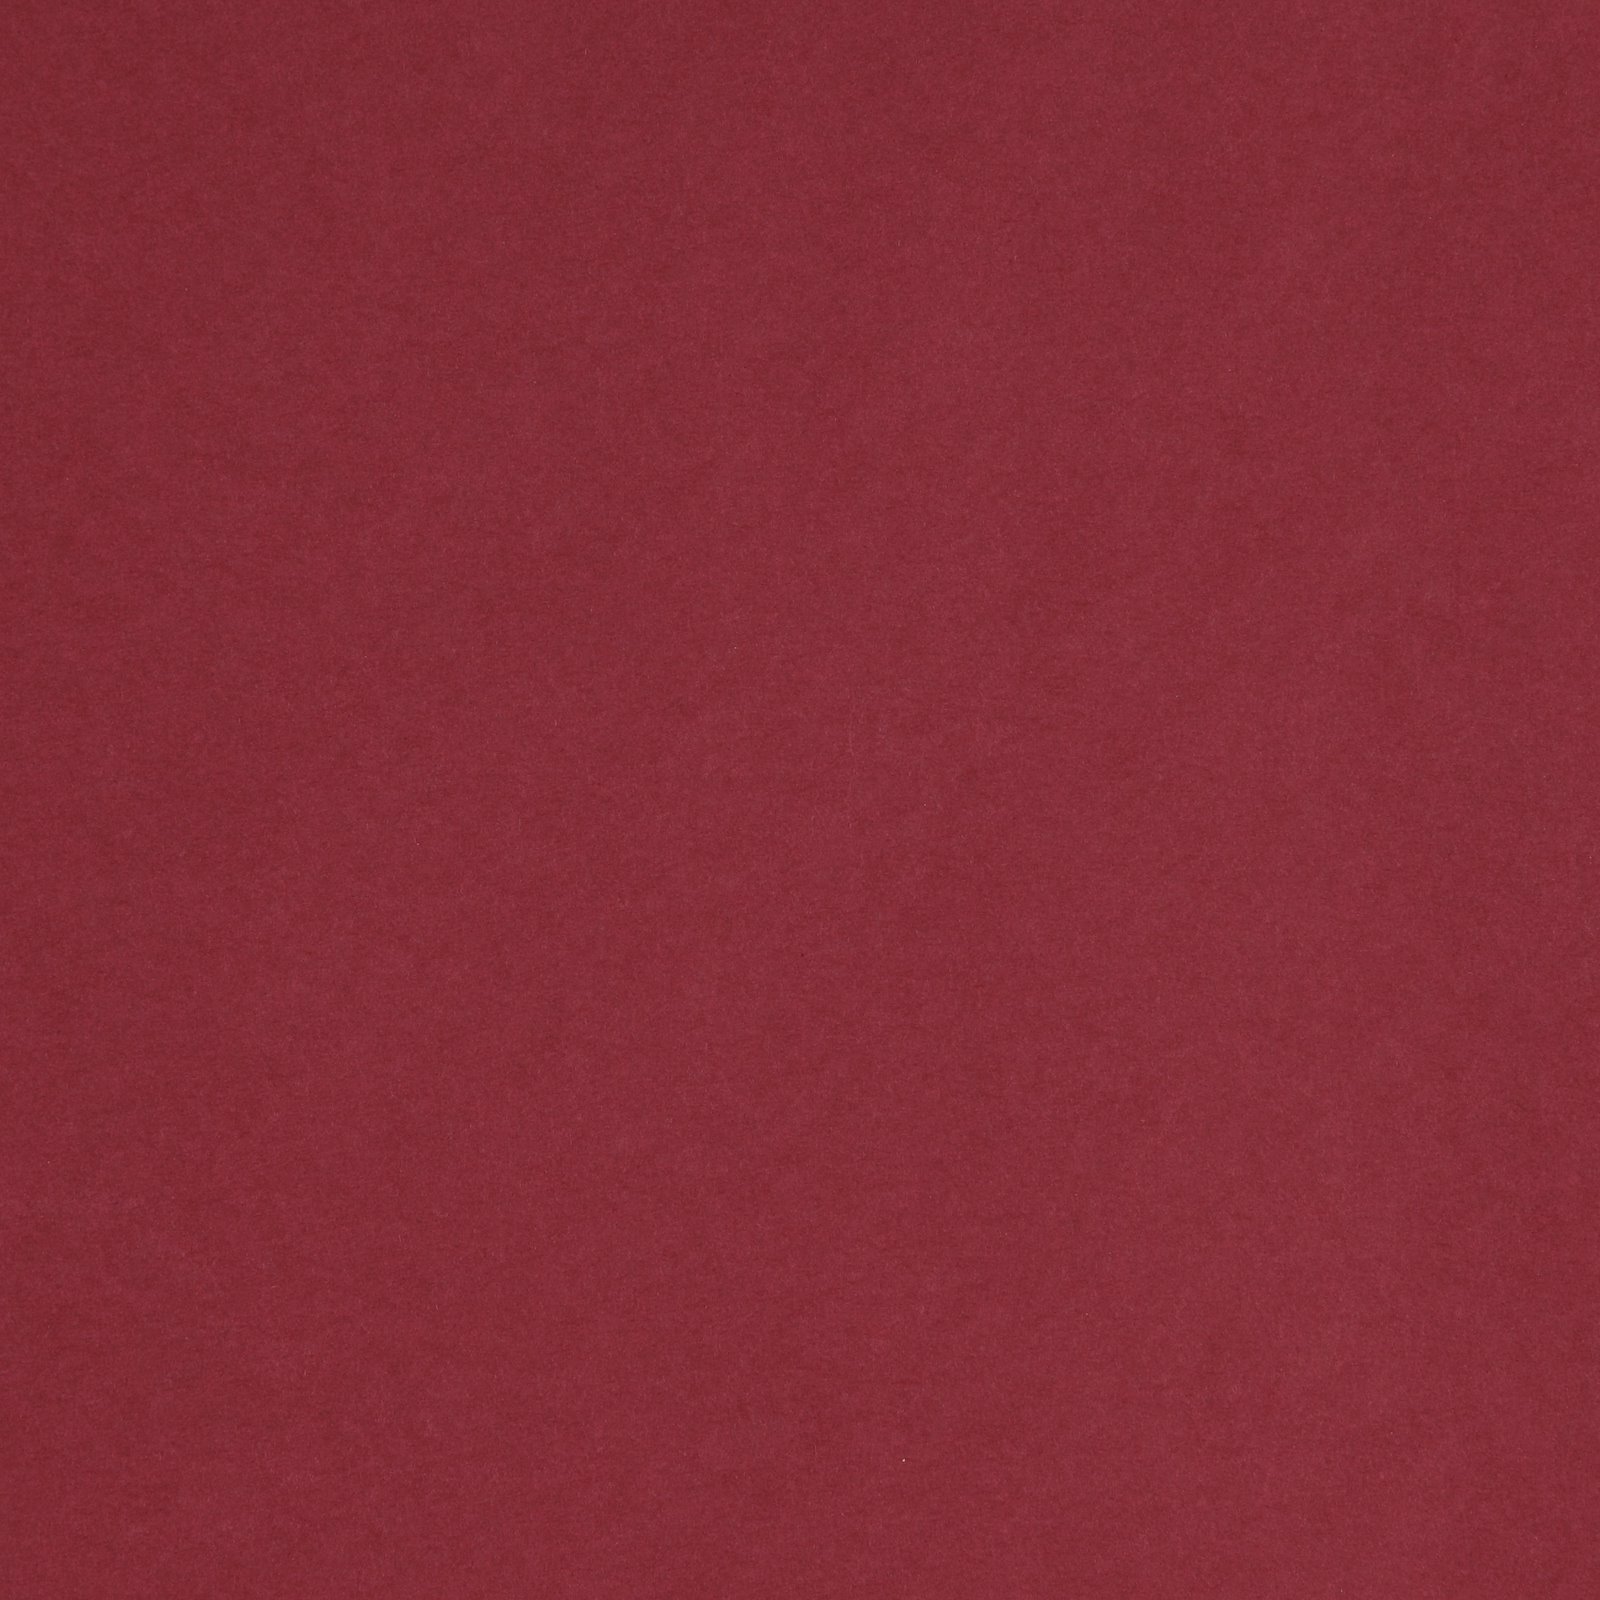 PAP FAB dark red 75x100cm 95507_pack_solid